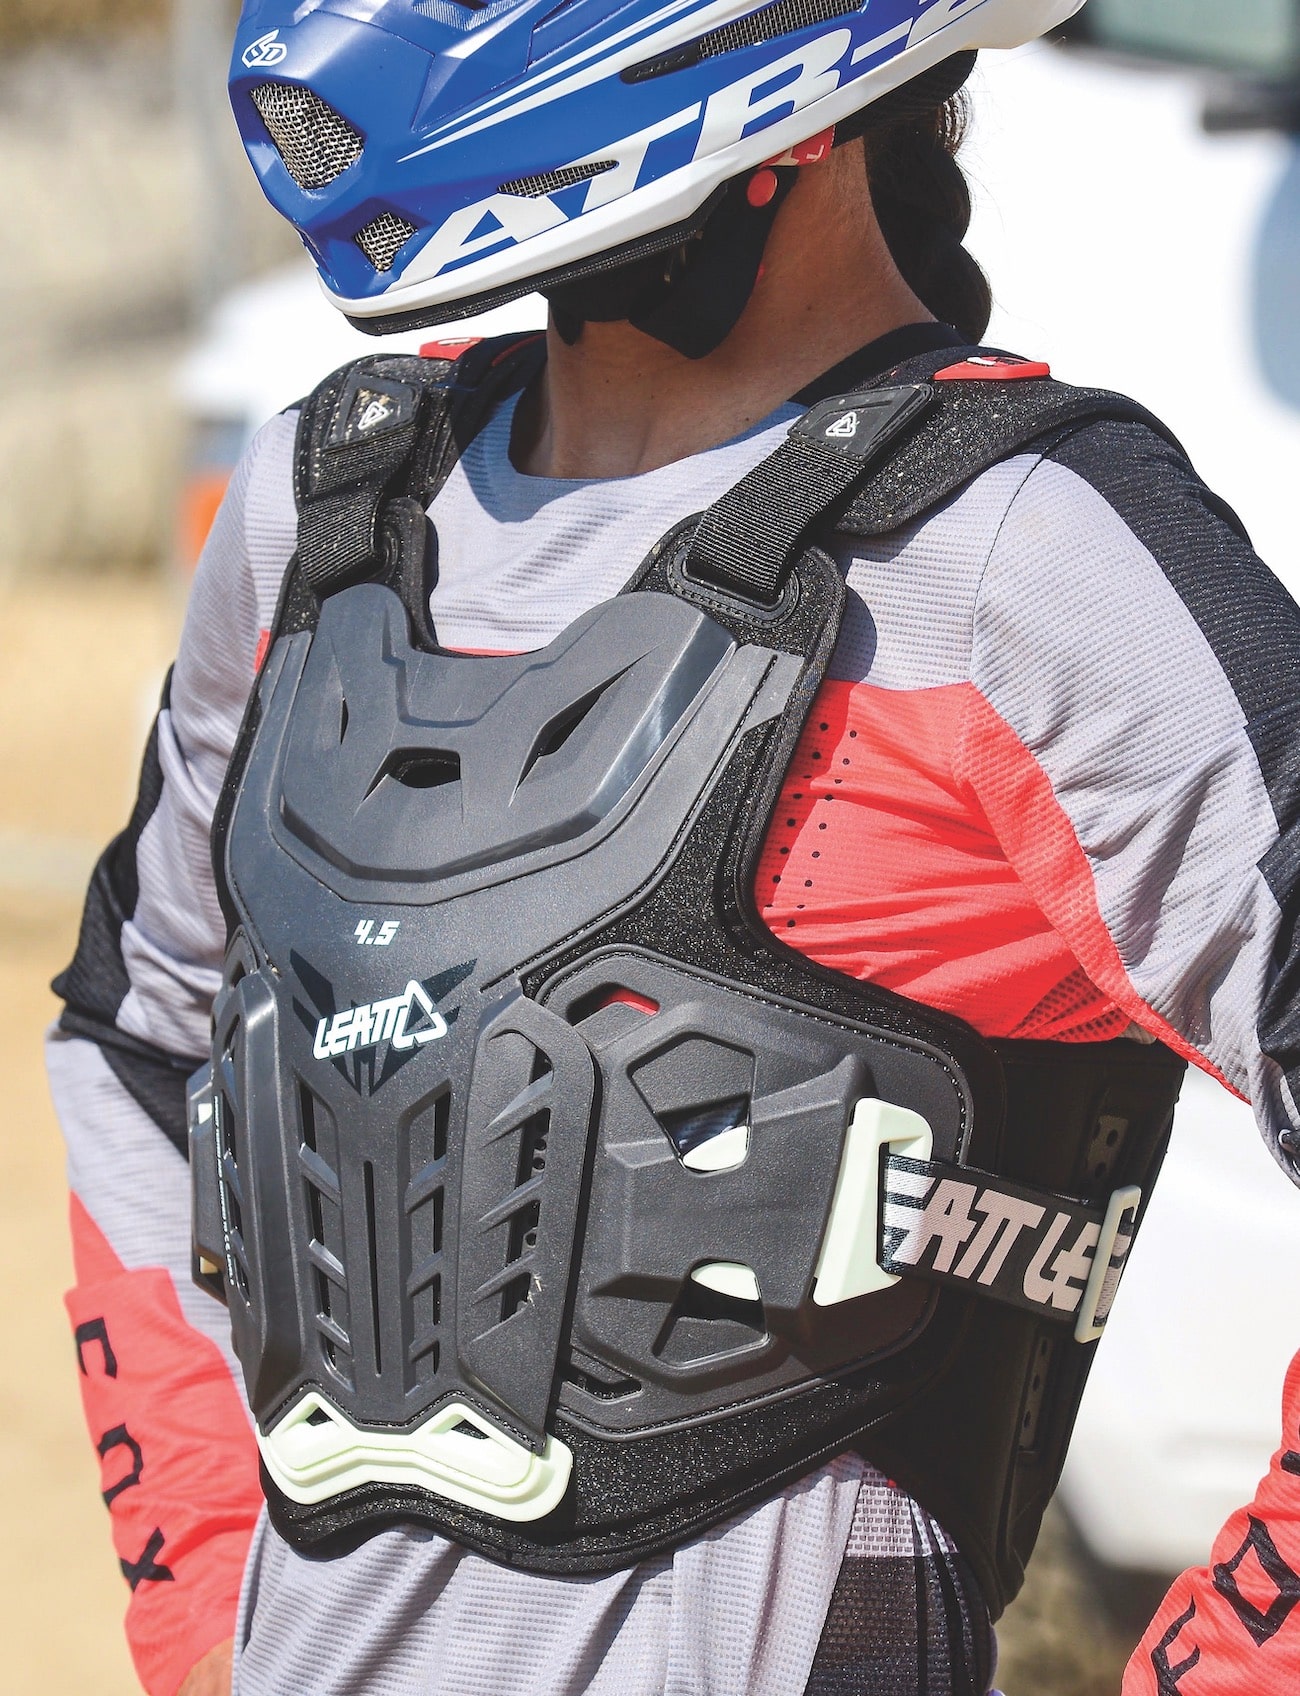 womens dirt bike chest protector, huge sale Save 87% available - rdd.edu.iq